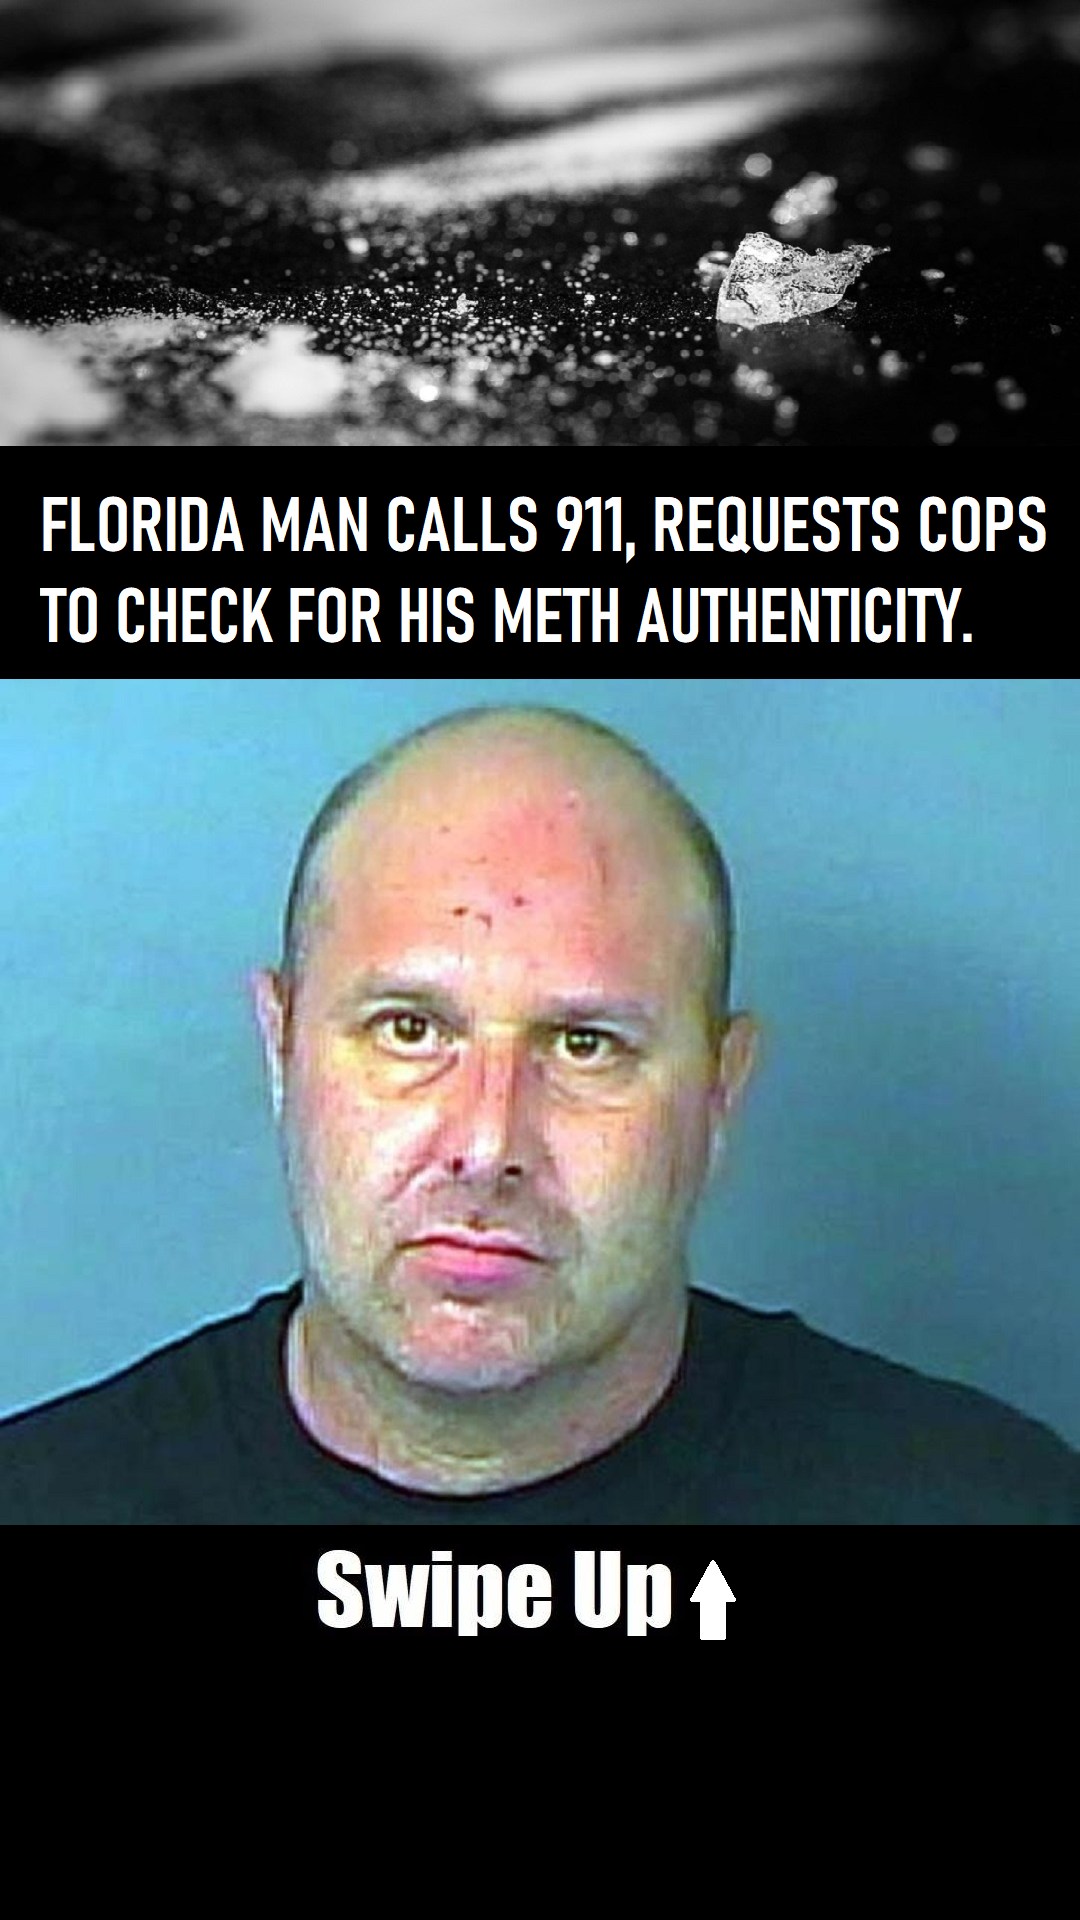 911_for_meth_authenticity.jpg